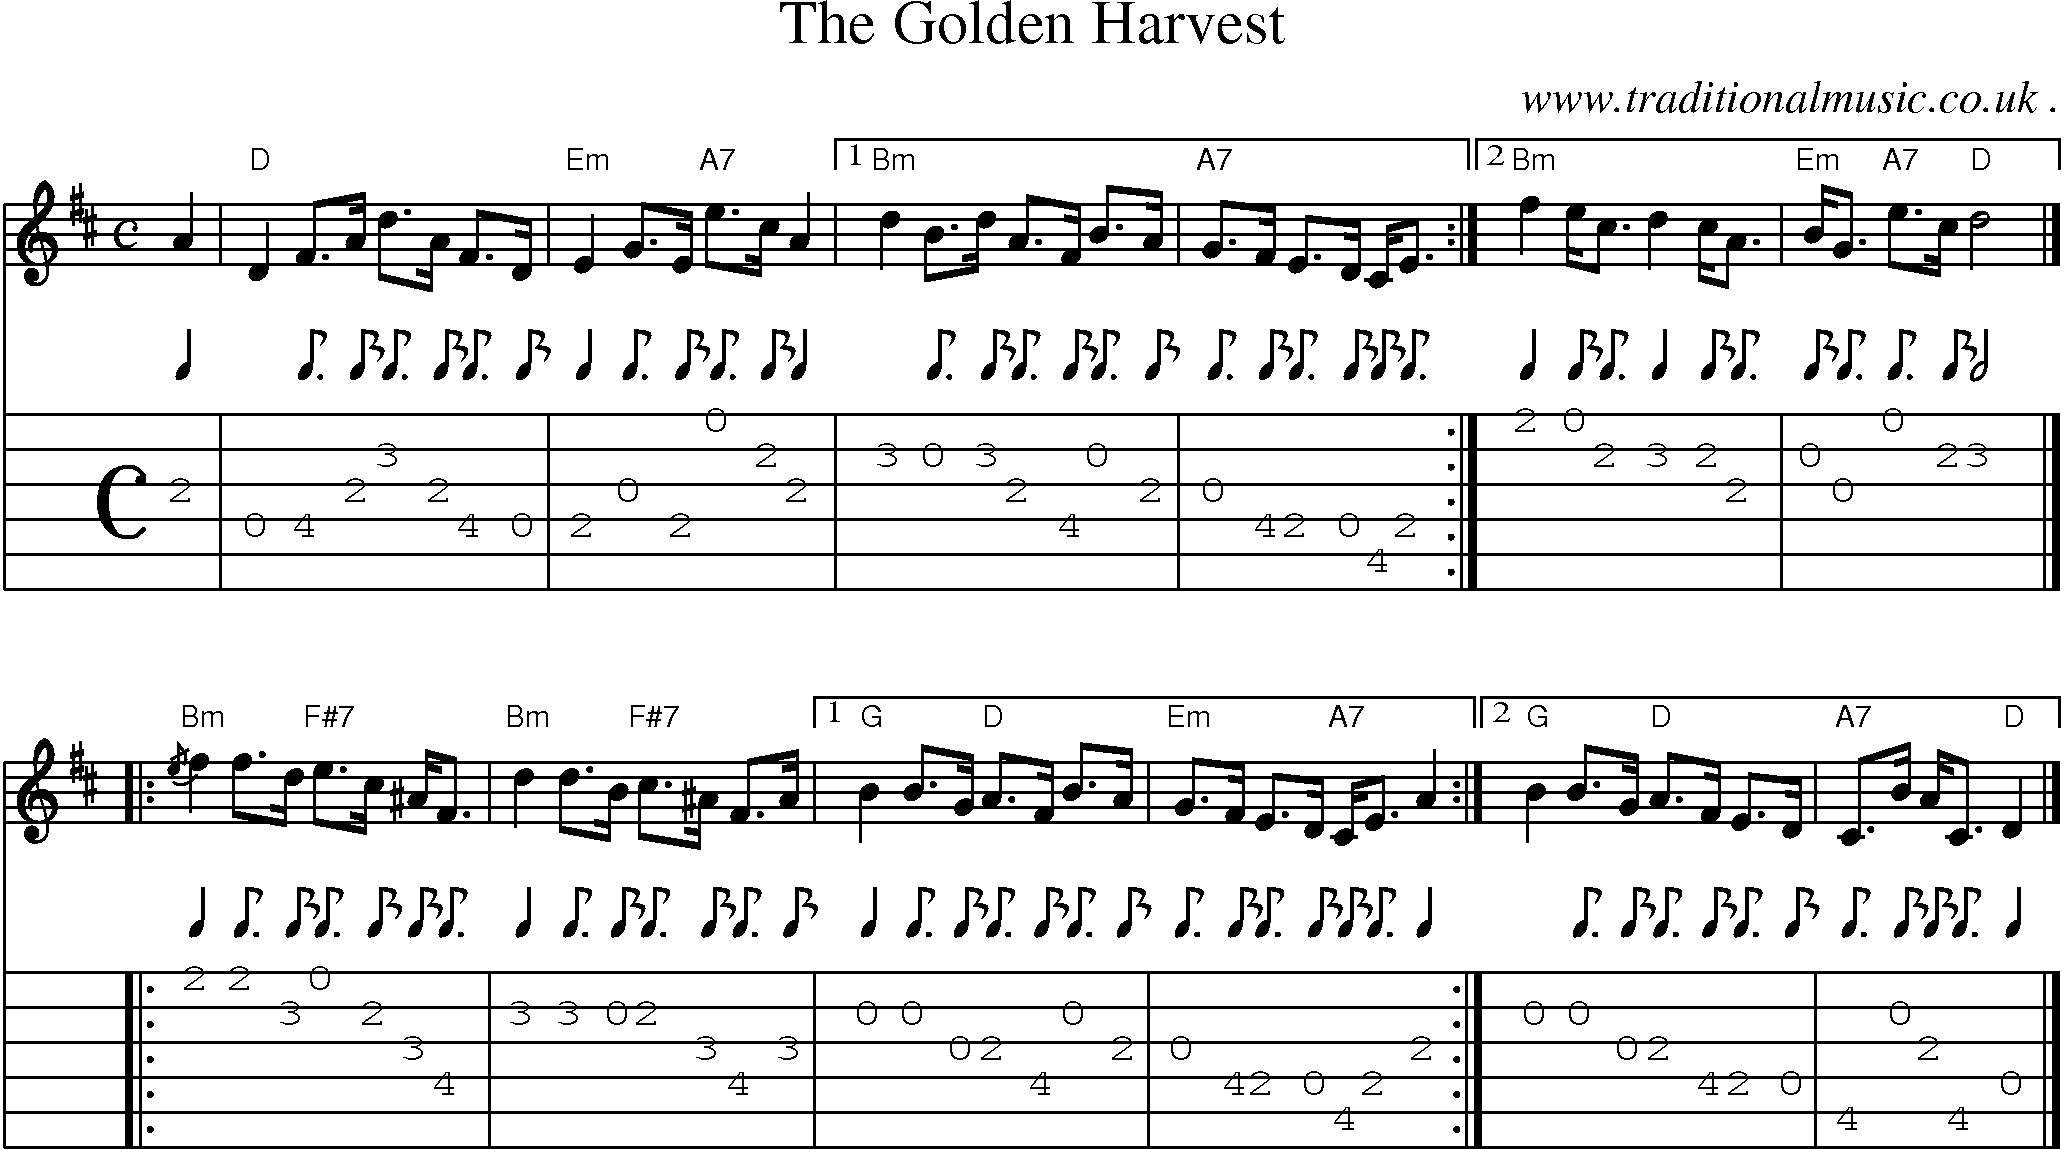 Sheet-music  score, Chords and Guitar Tabs for The Golden Harvest